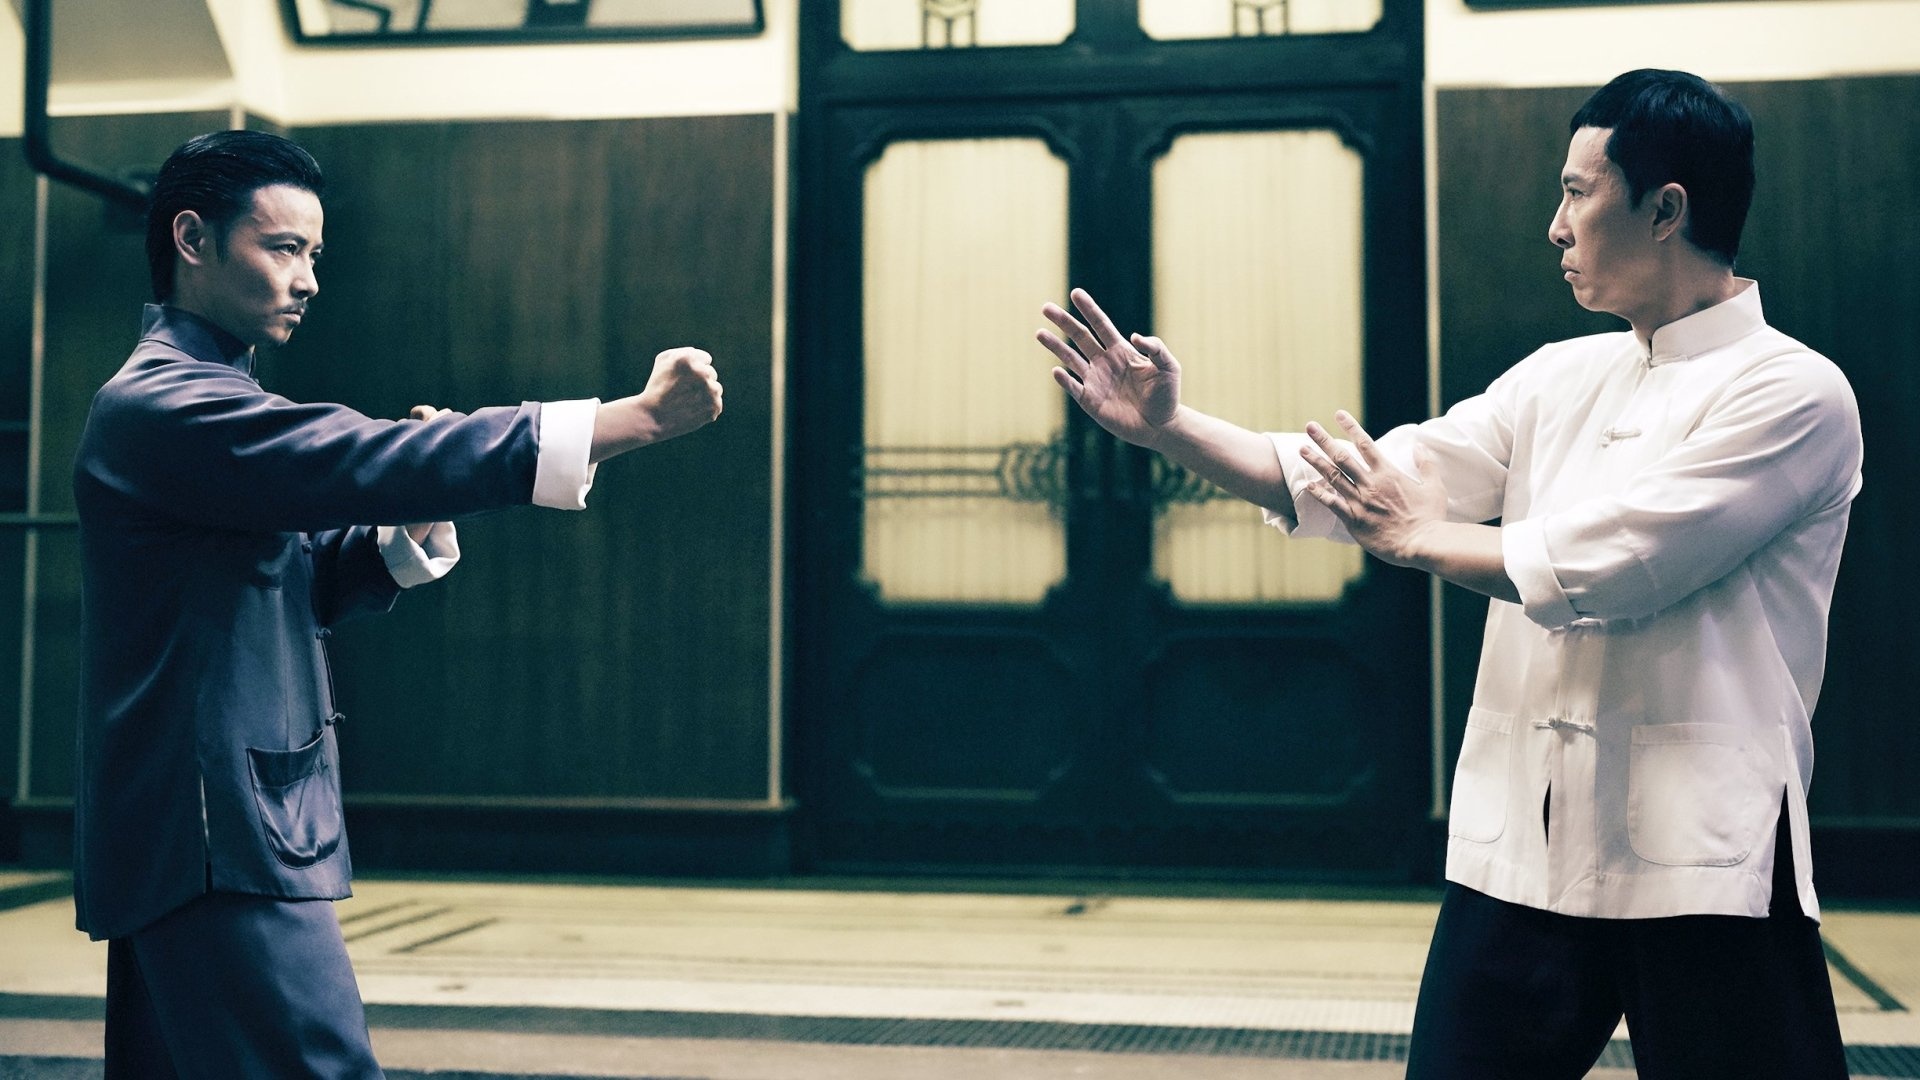 Ip Man movies, 2448x1377 wallpapers, HD background images, 1920x1080 Full HD Desktop